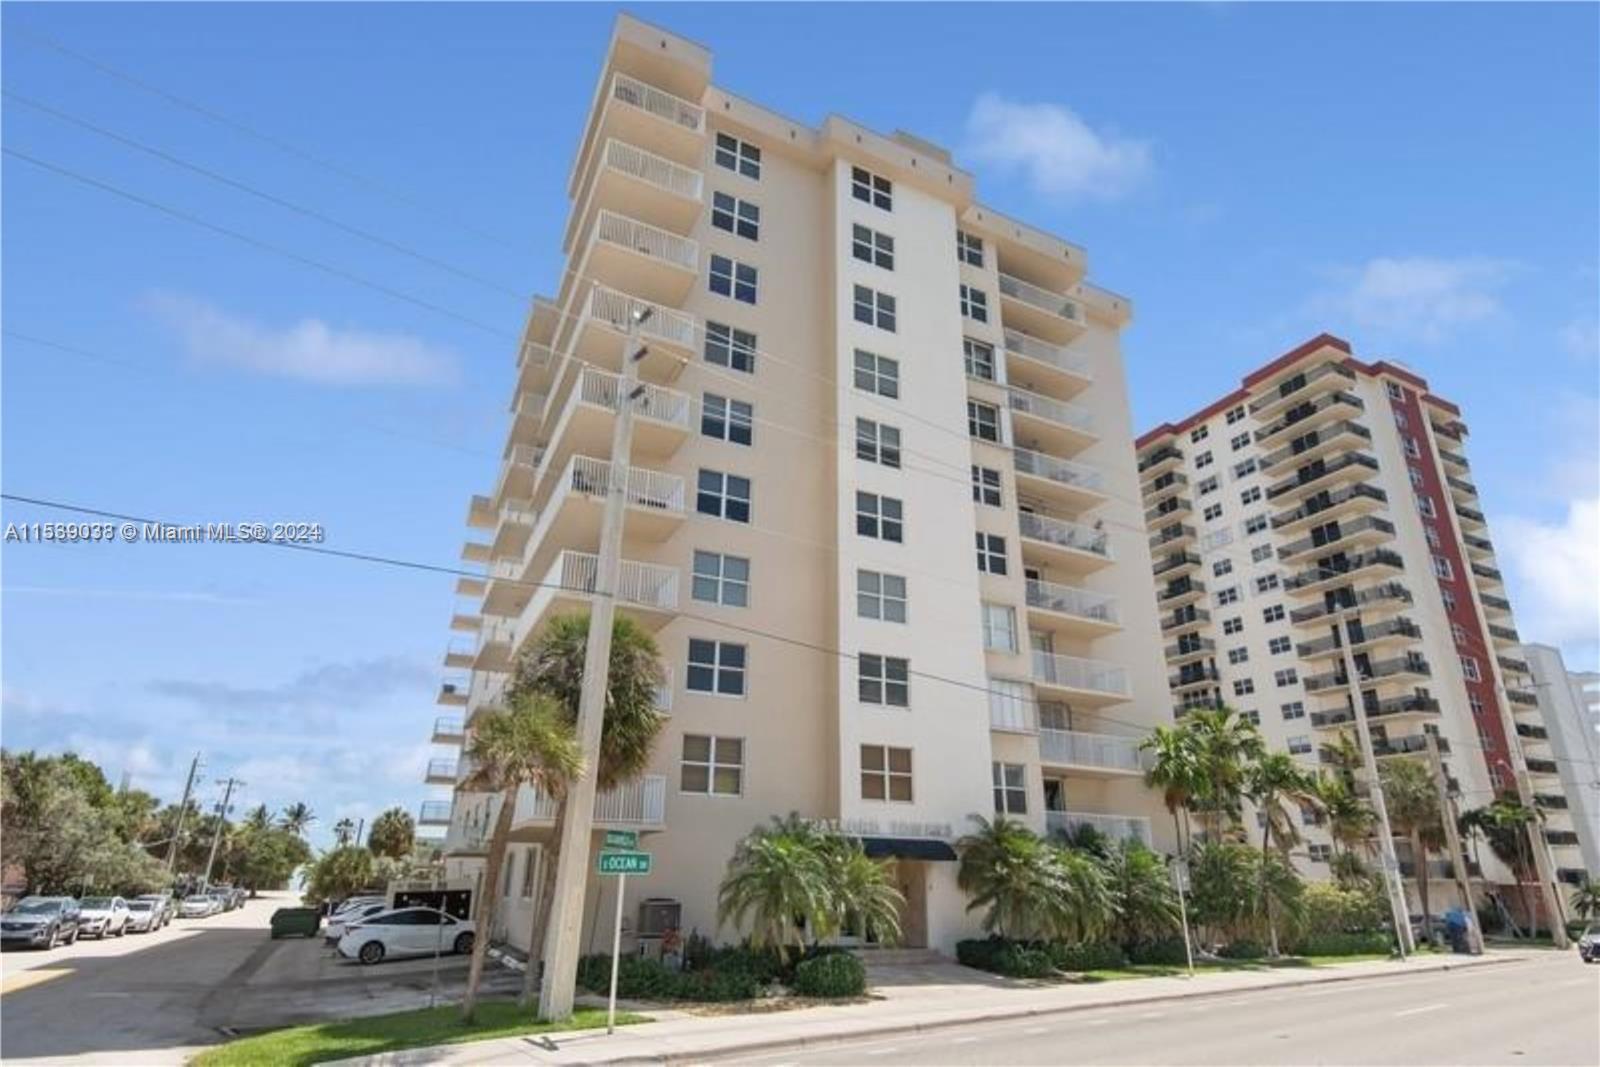 Photo of 1401 S Ocean Dr #504 in Hollywood, FL